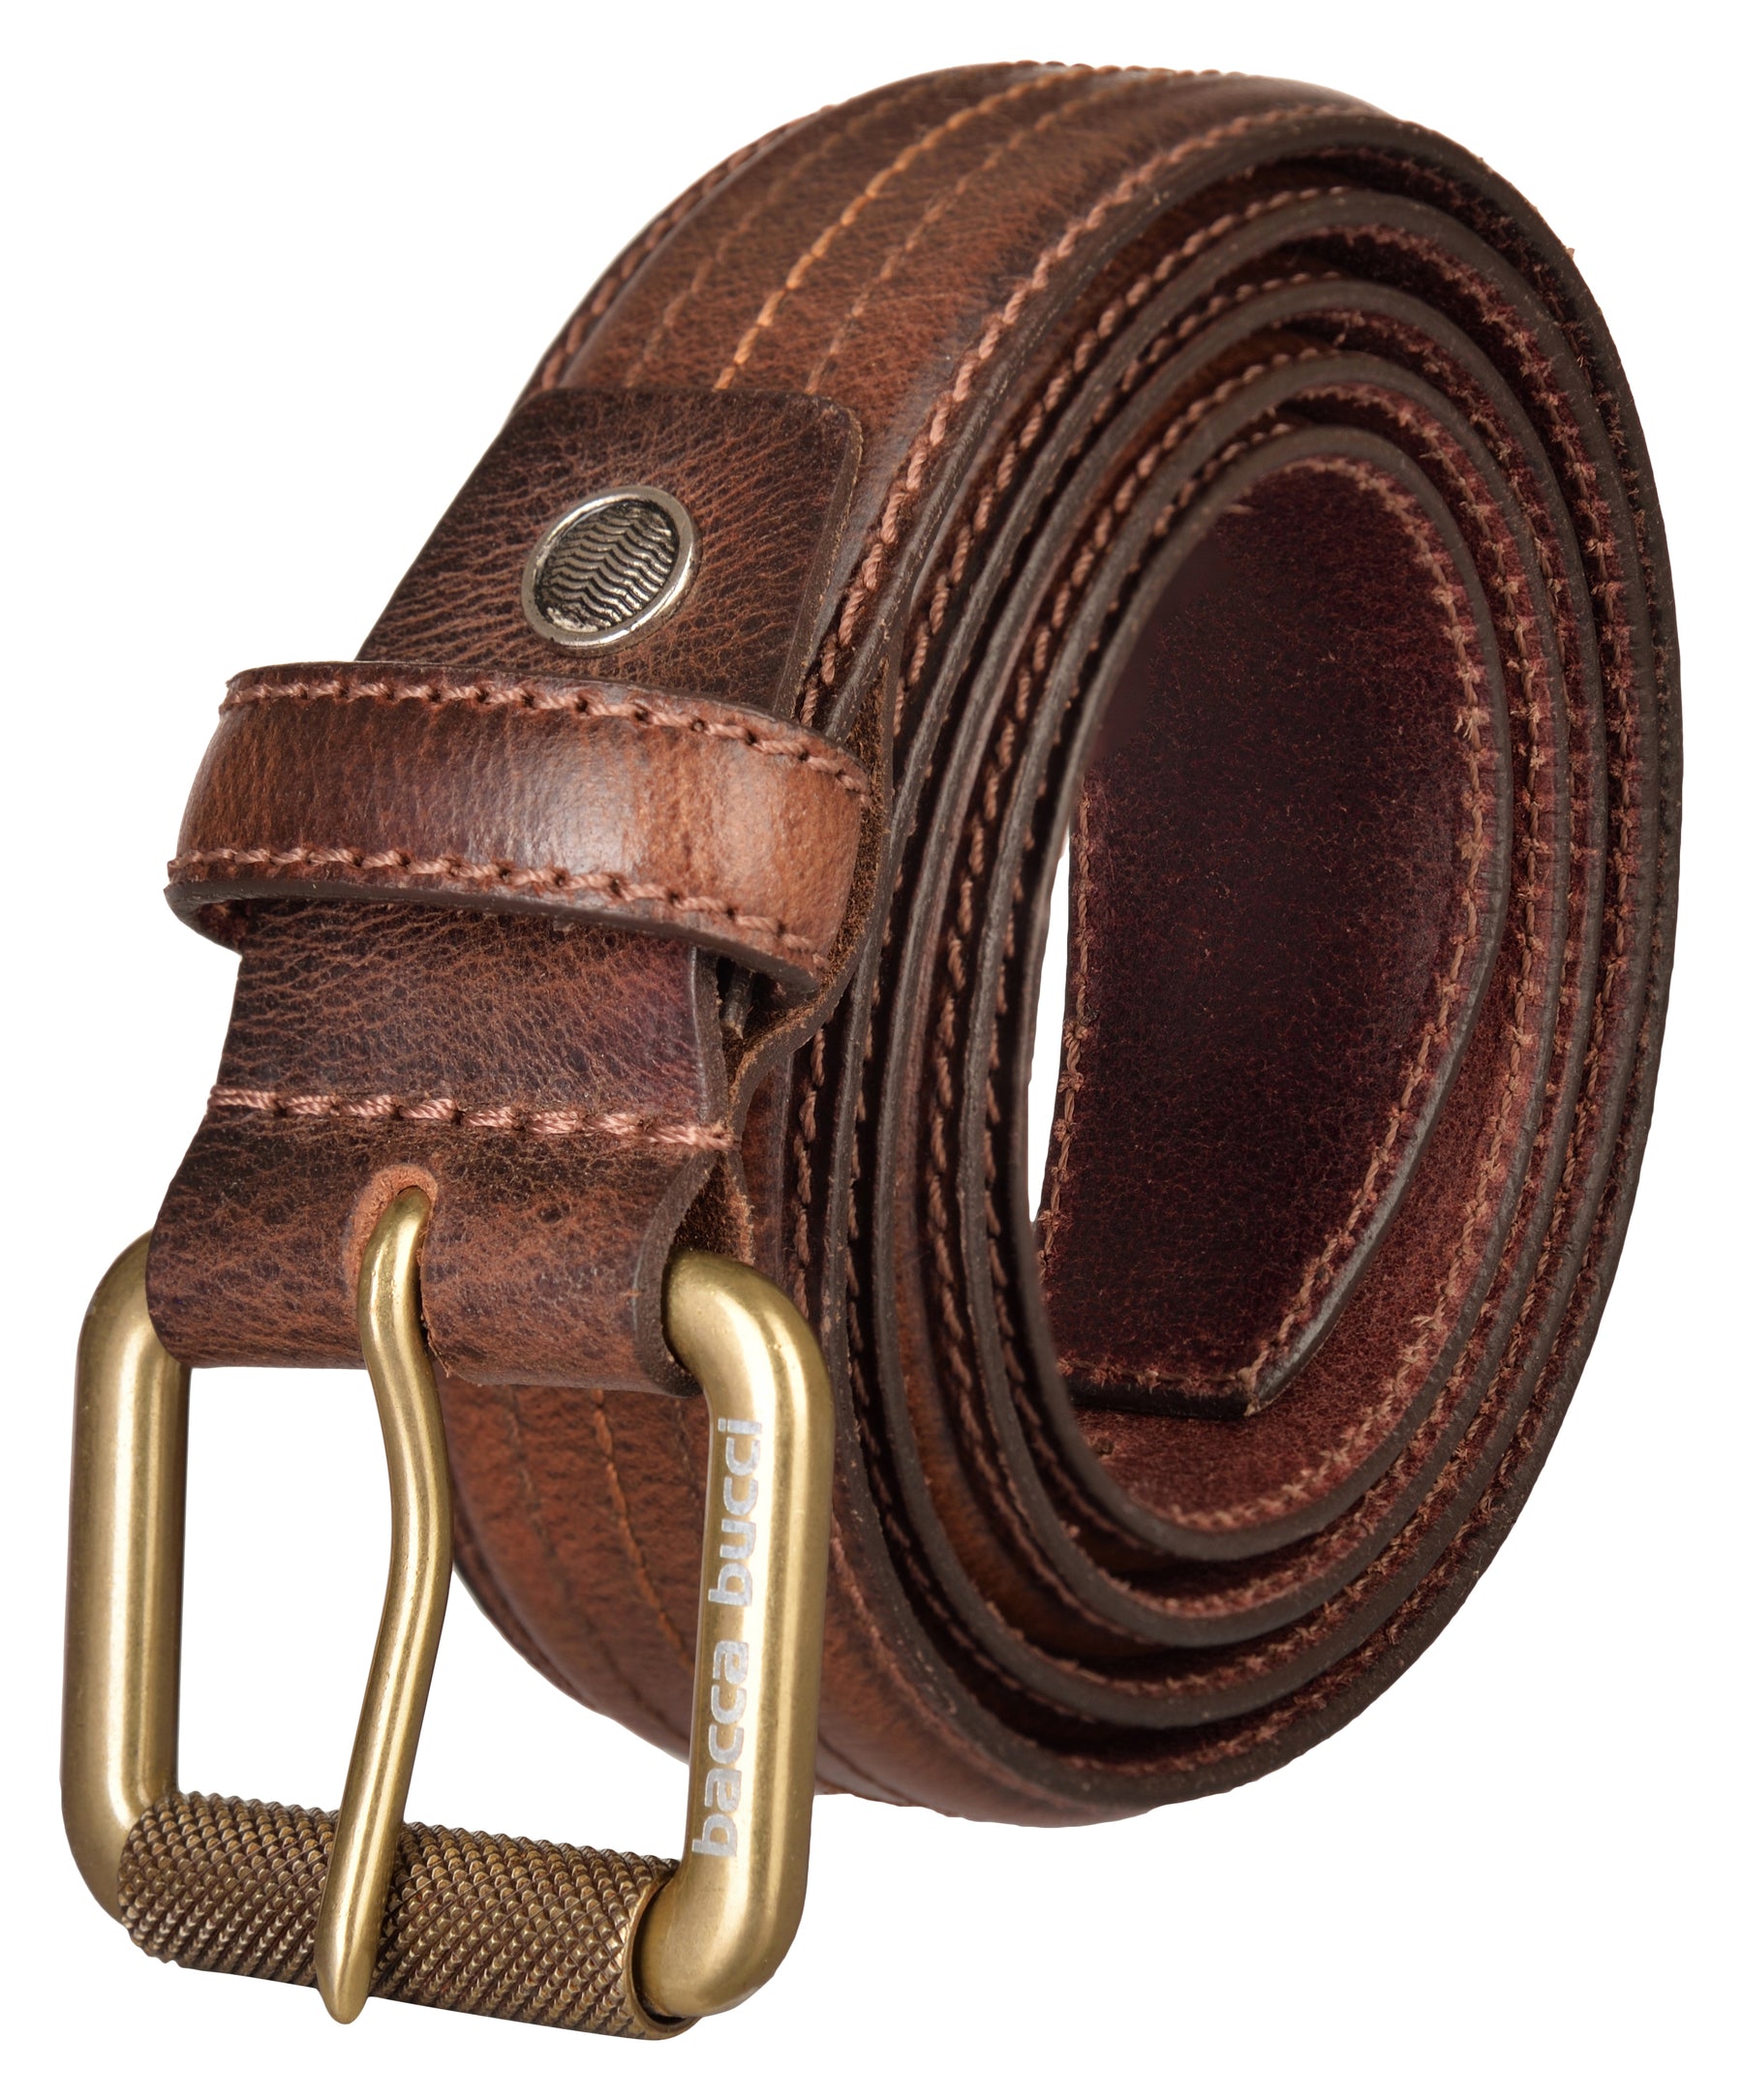 Men's Classic Dress belt with Genuine grain leather & Genuine soft Leather Wallet combo Gift Set for men - Bacca Bucci